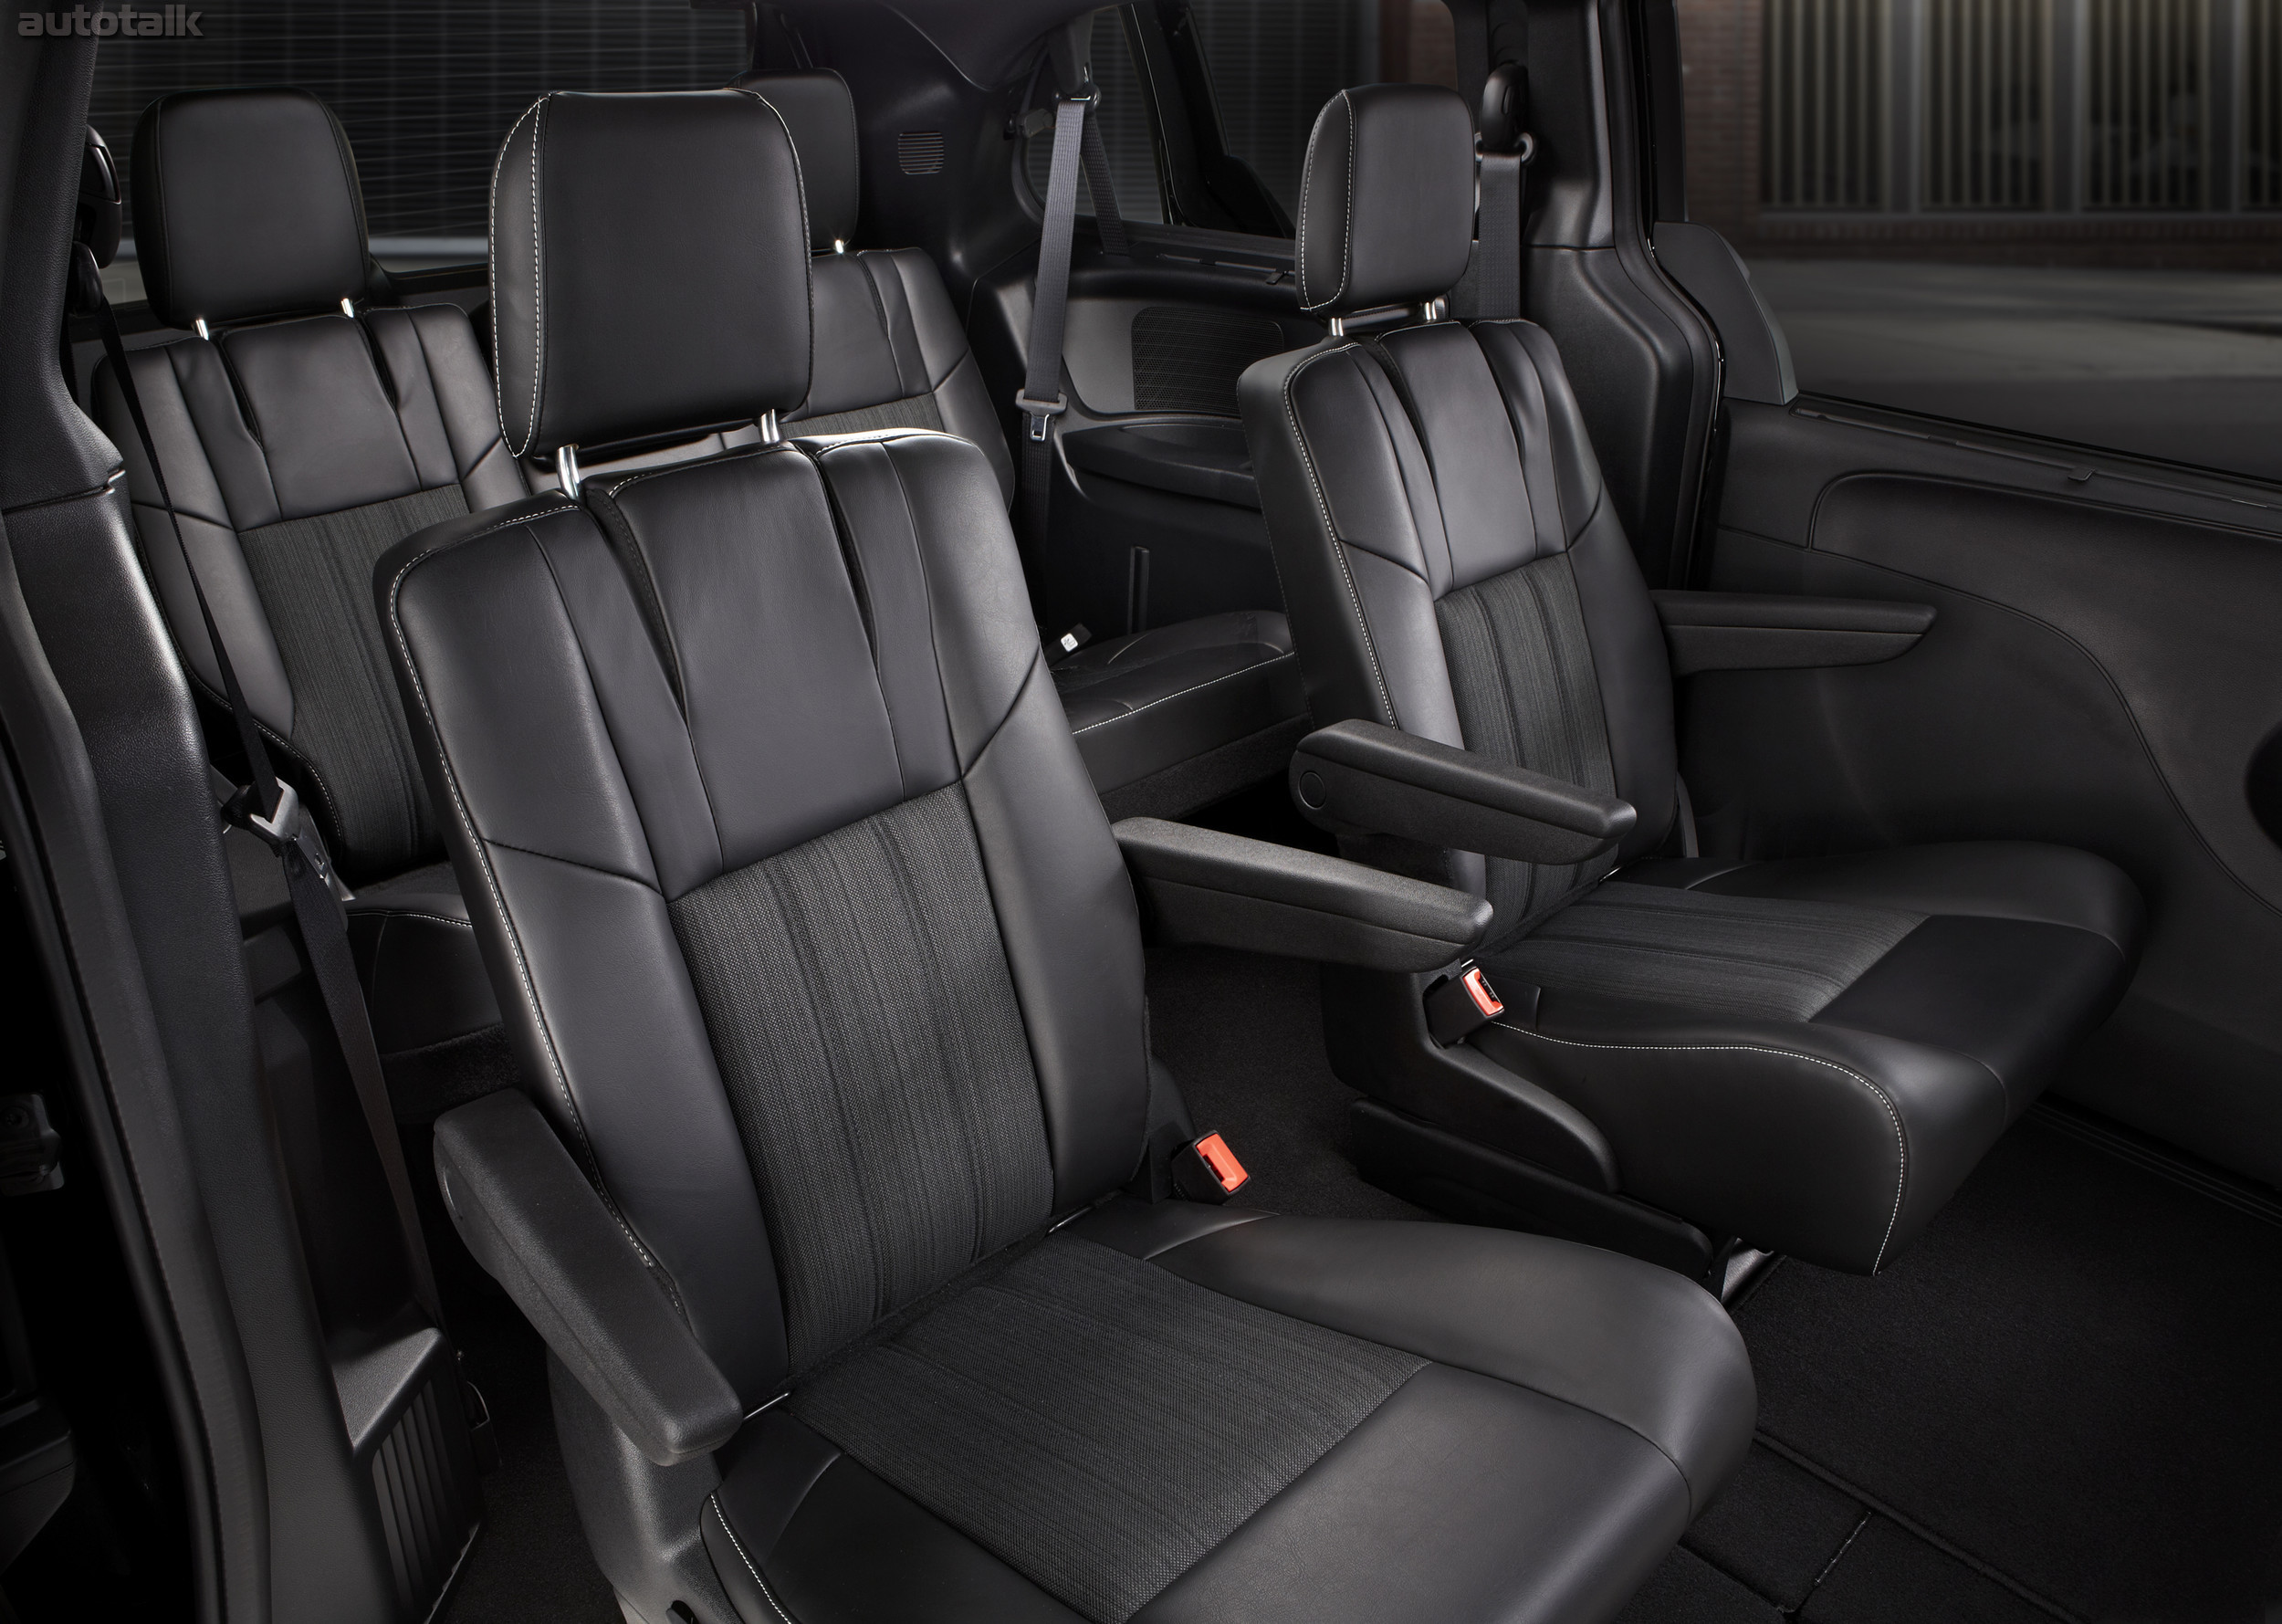 2013 Chrysler Town & Country S